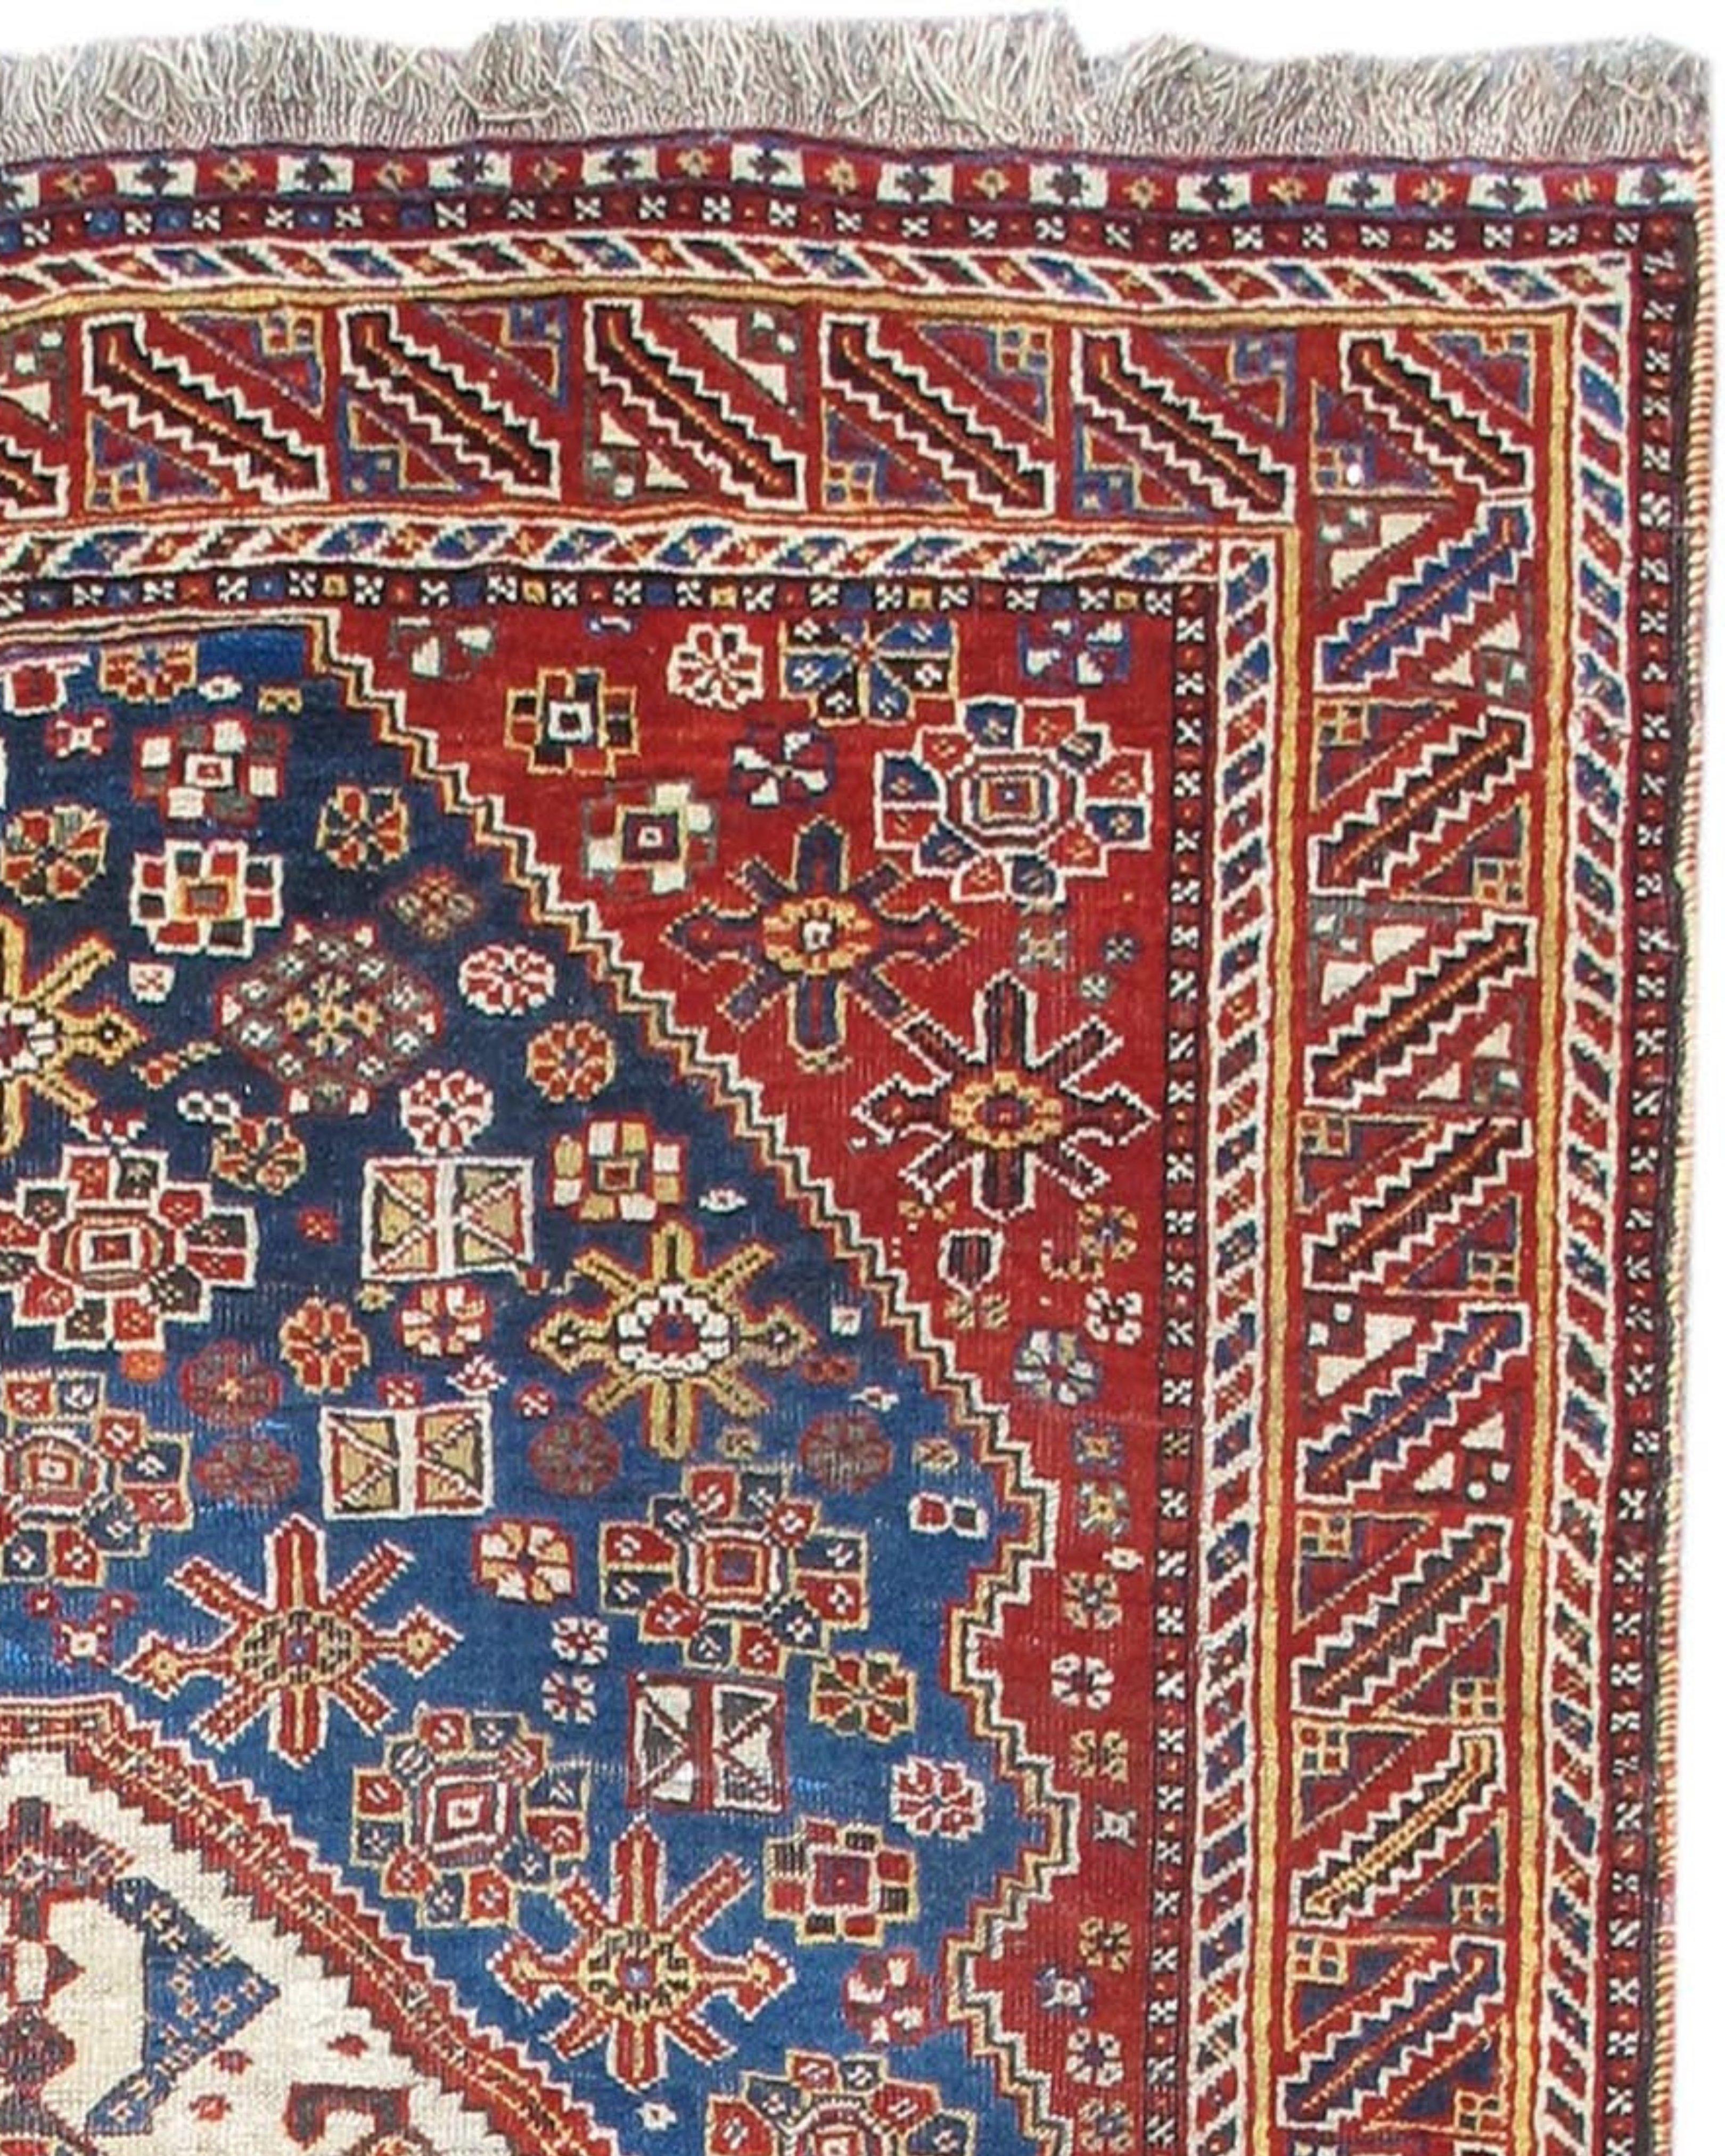 Hand-Knotted Antique Southwest Persian Qashqai Rug, c. 1900 For Sale